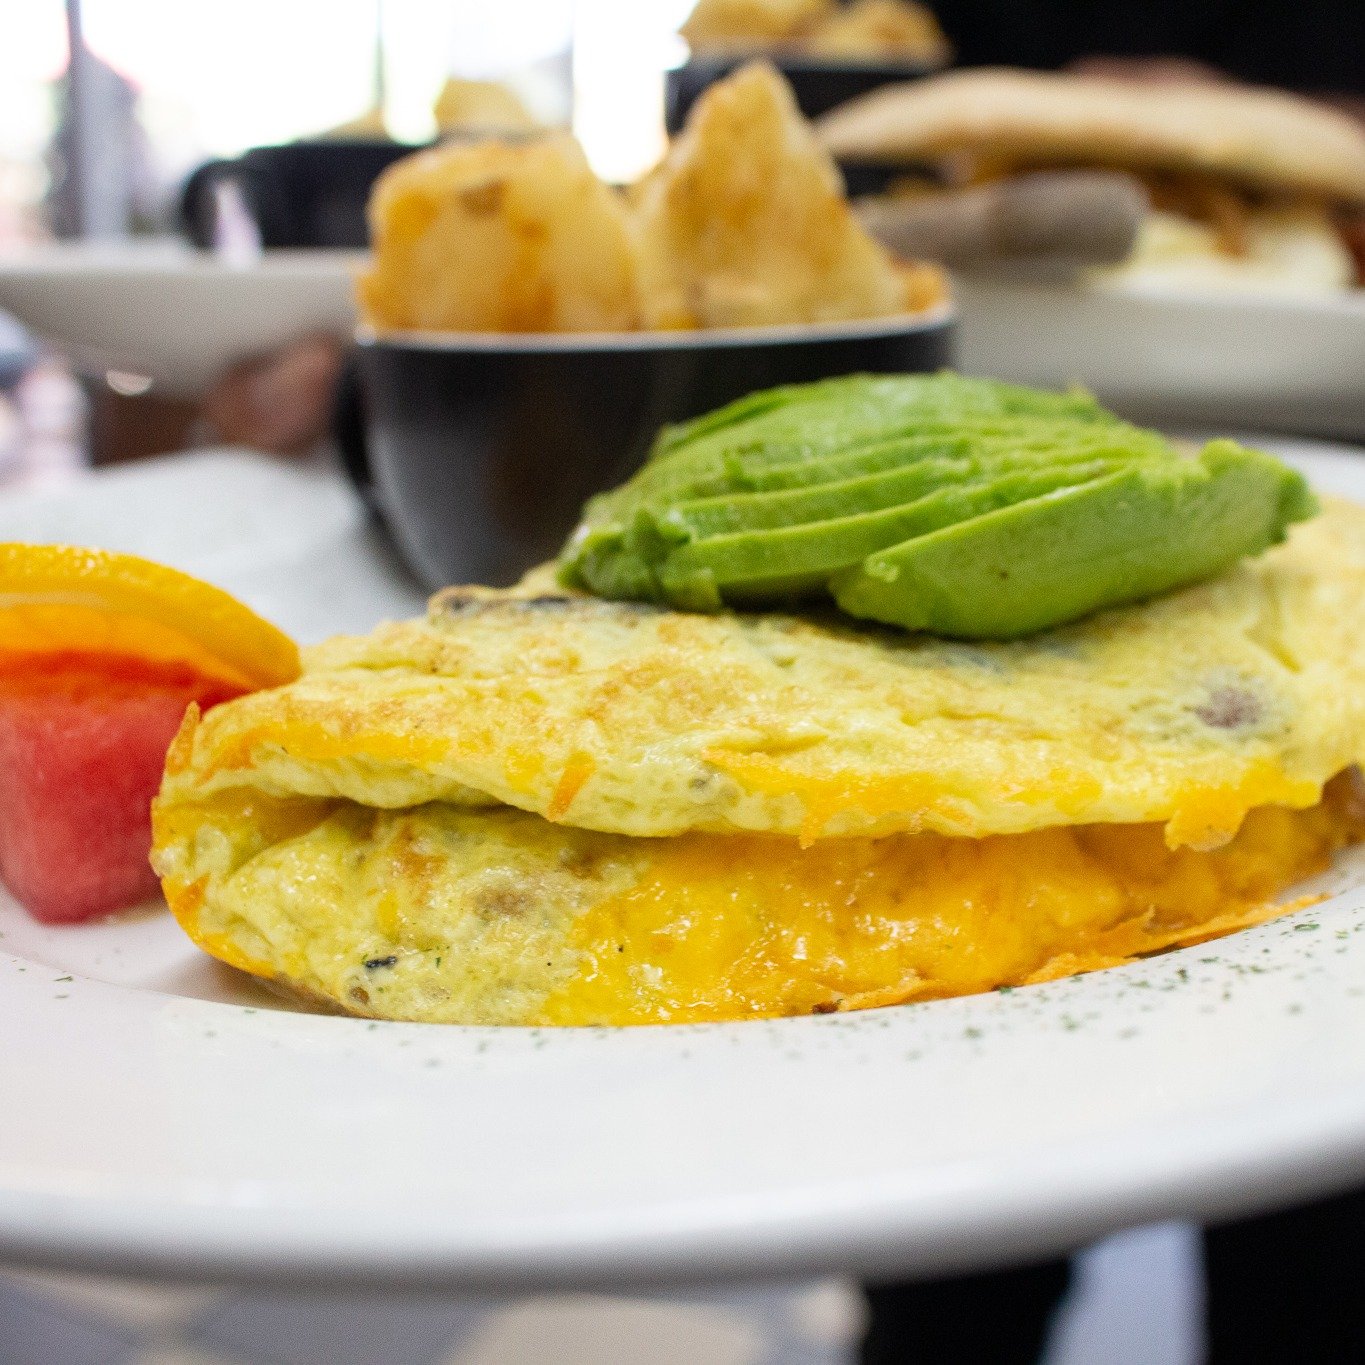 Celebrating National Egg Month with sunny-side ups, scrambles, and everything in between! 🍳 How are you ordering your eggs at Cups?
&hellip;
#dinegps #visitpalmdesert #cupscafe #foodcontent #hiddengem #breakfast #brunch